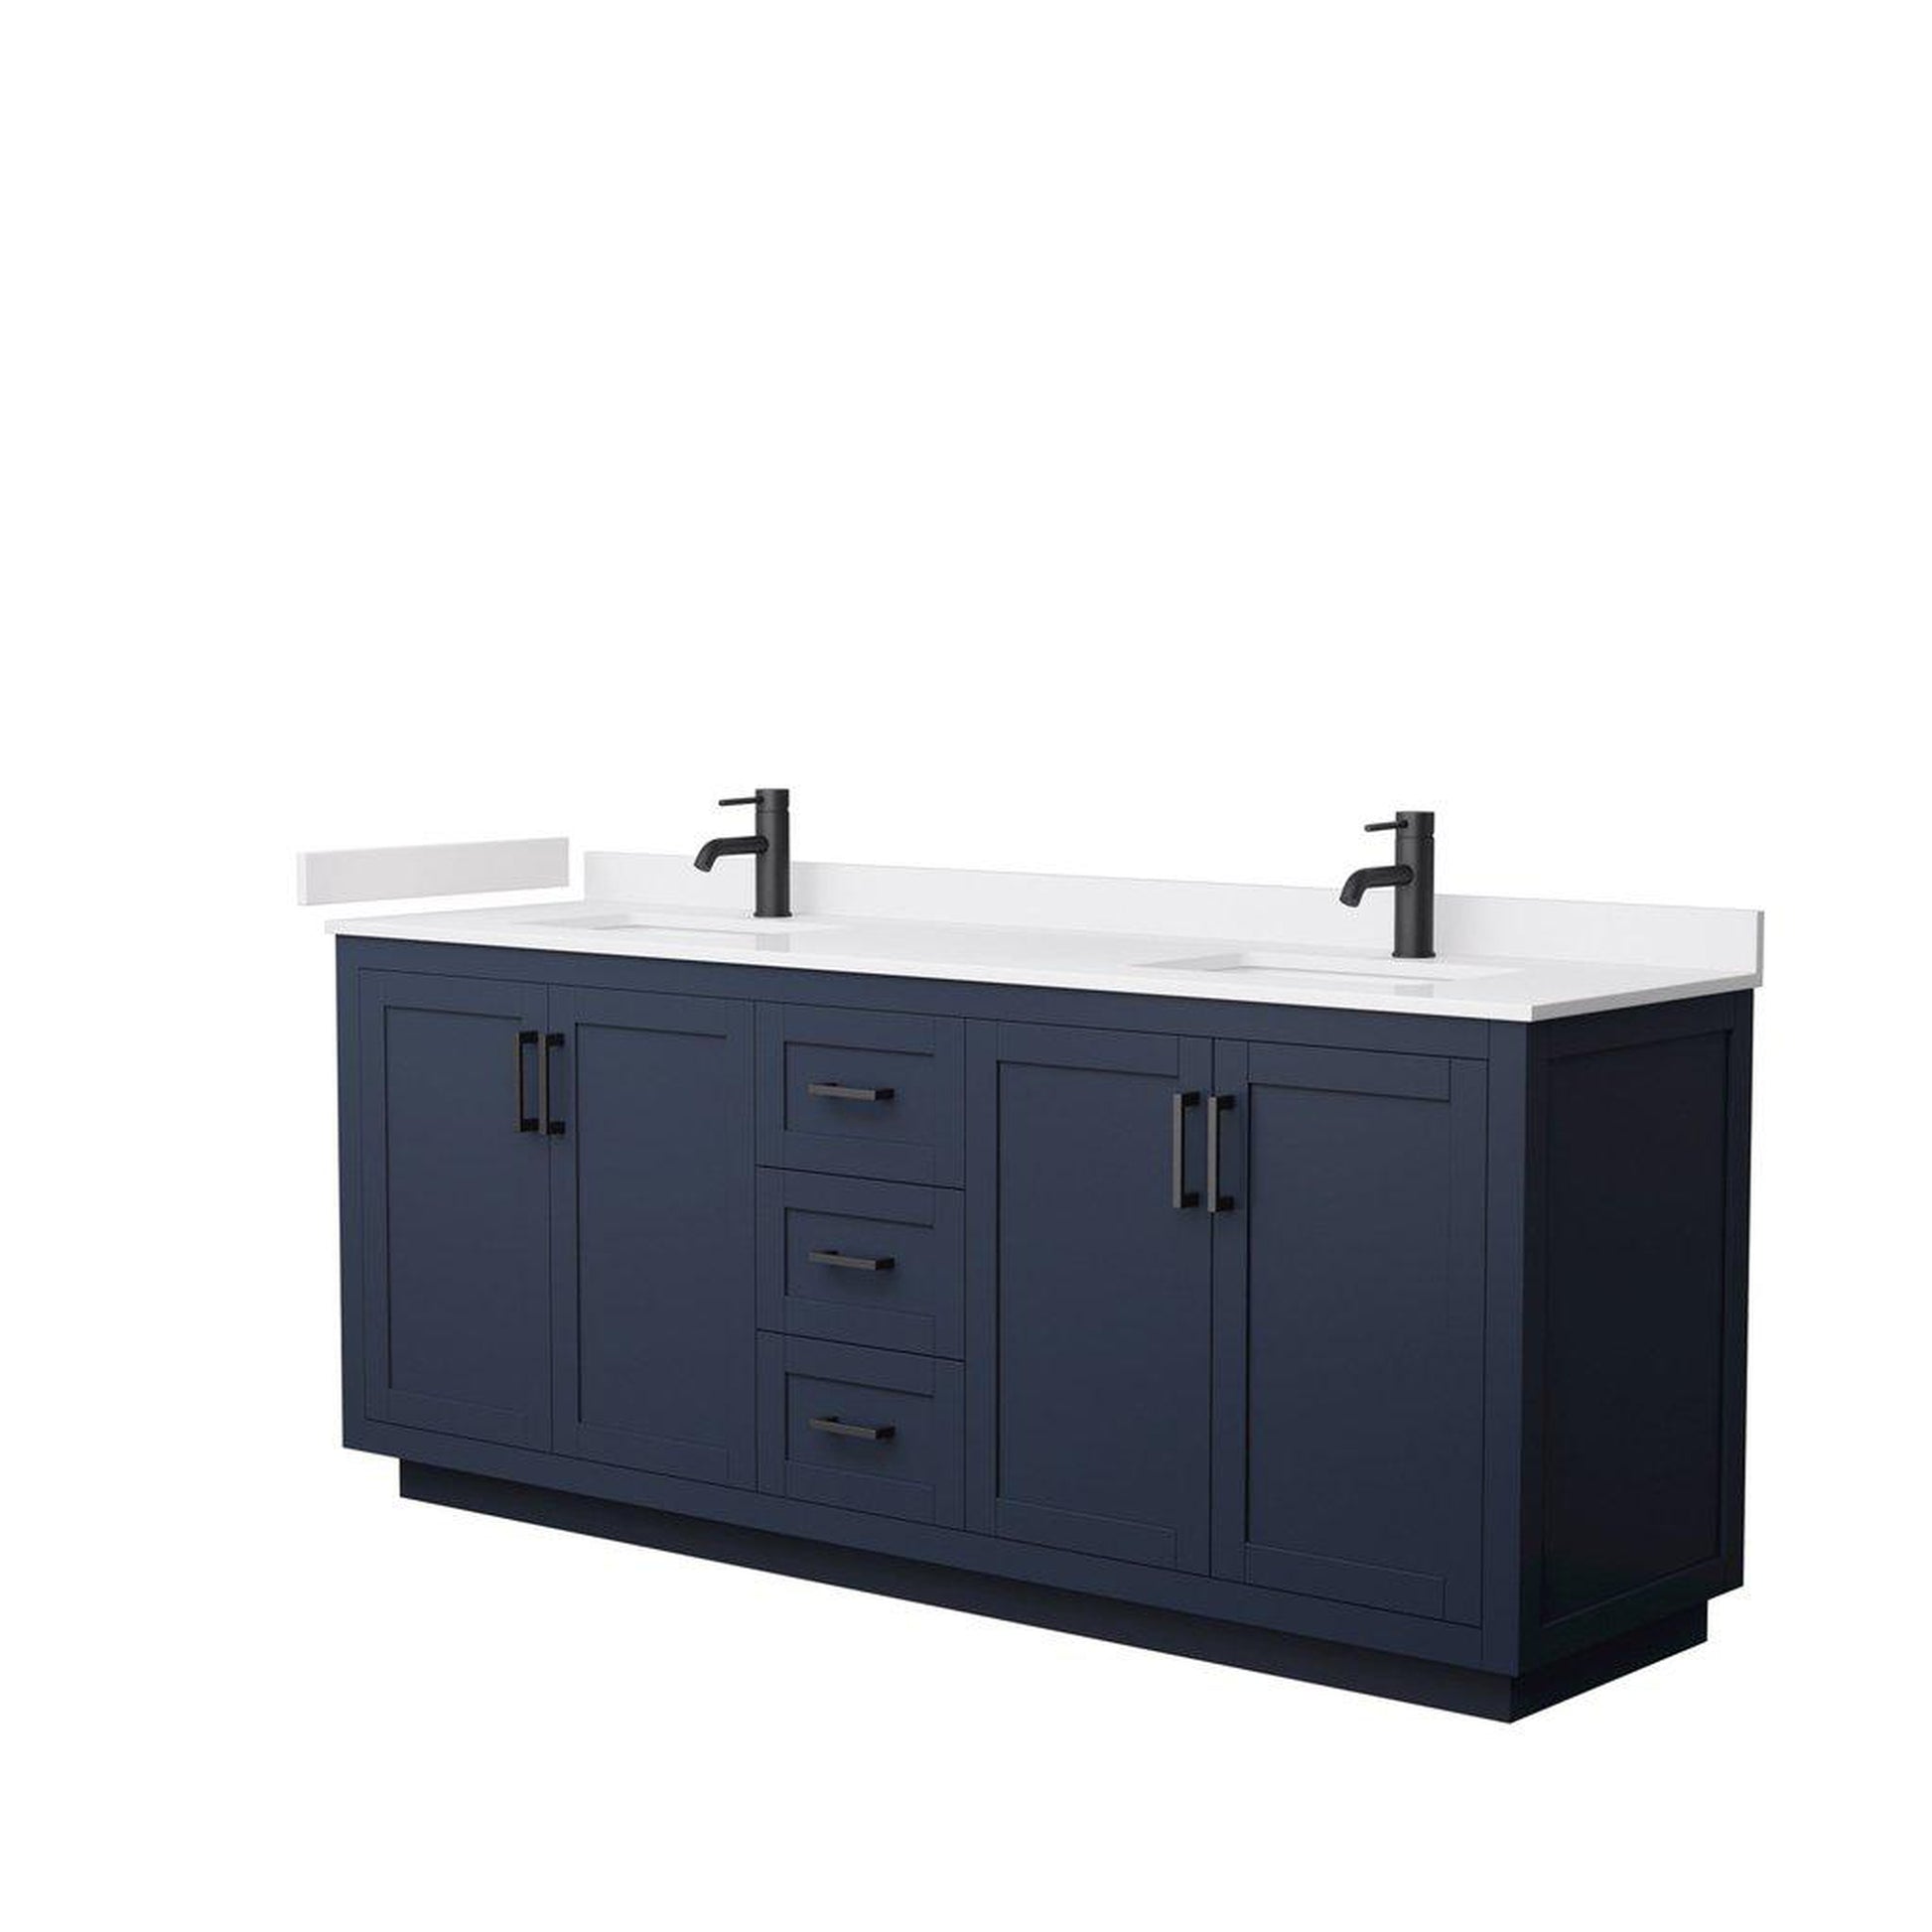 Wyndham Collection Miranda 80" Double Bathroom Dark Blue Vanity Set With White Cultured Marble Countertop, Undermount Square Sink, And Matte Black Trim